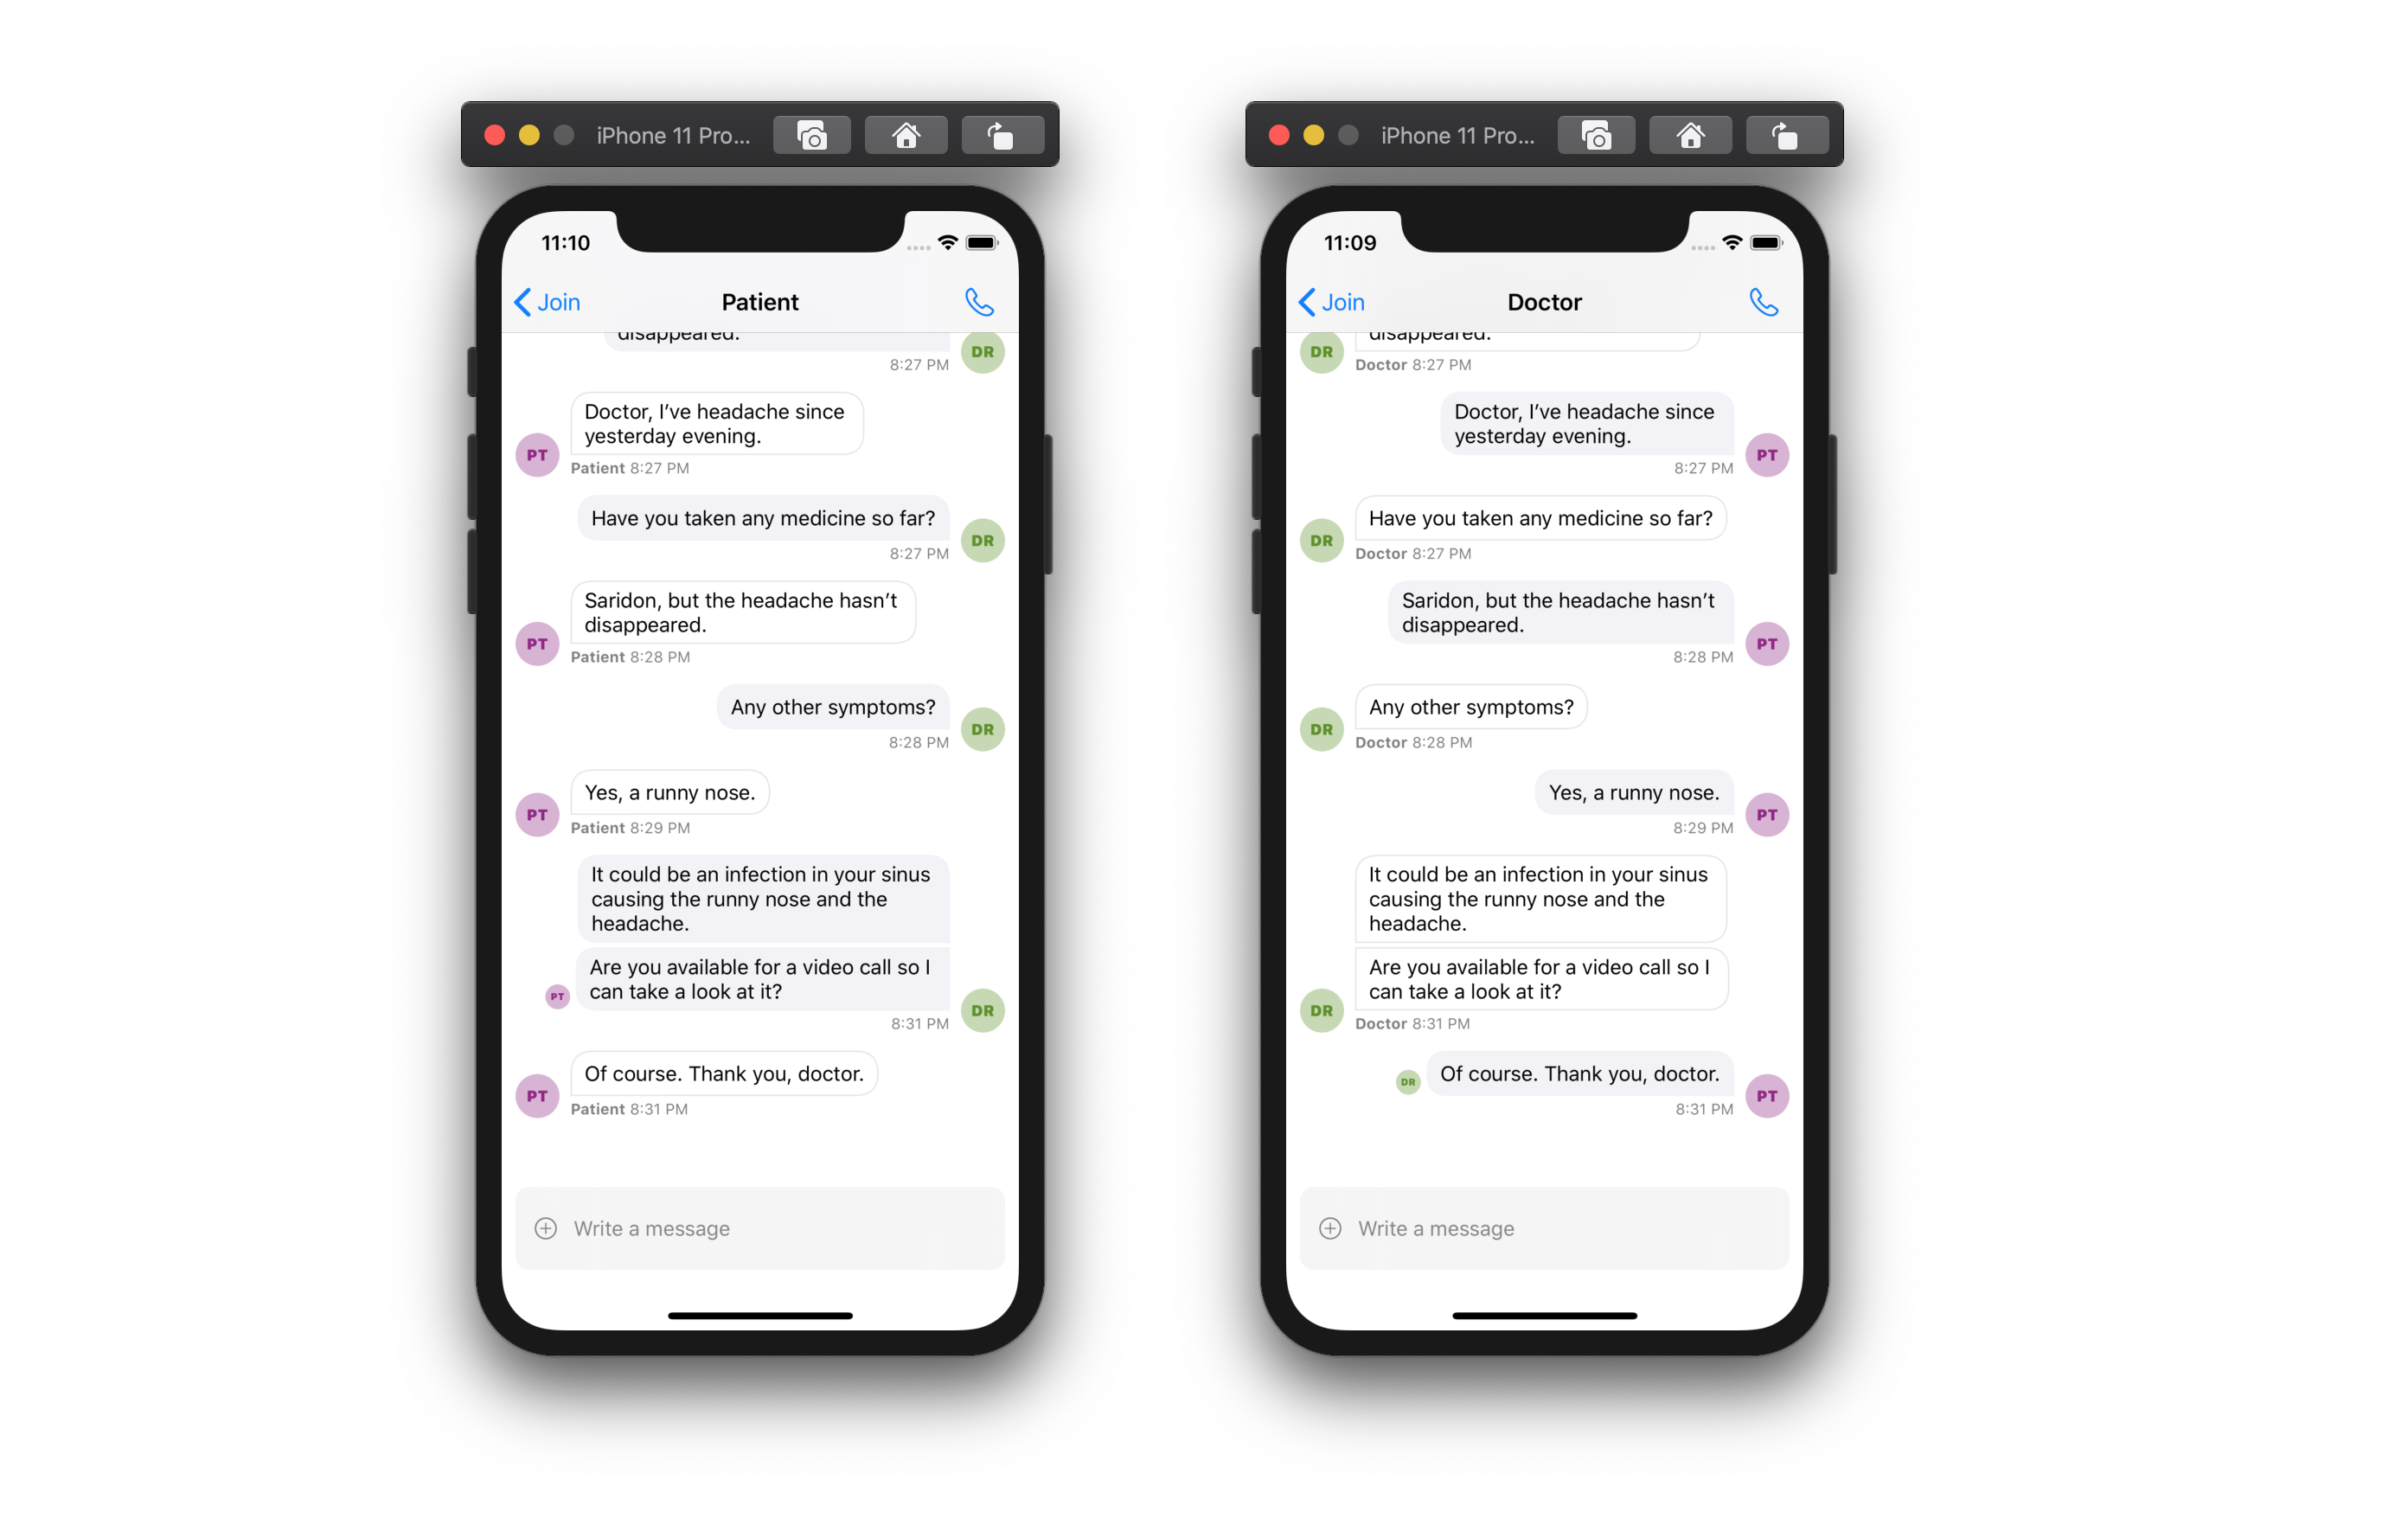 Image shows two screenshots of a conversation in a chat screen, one from the perspective of the patient, and the other from the perspective of the doctor